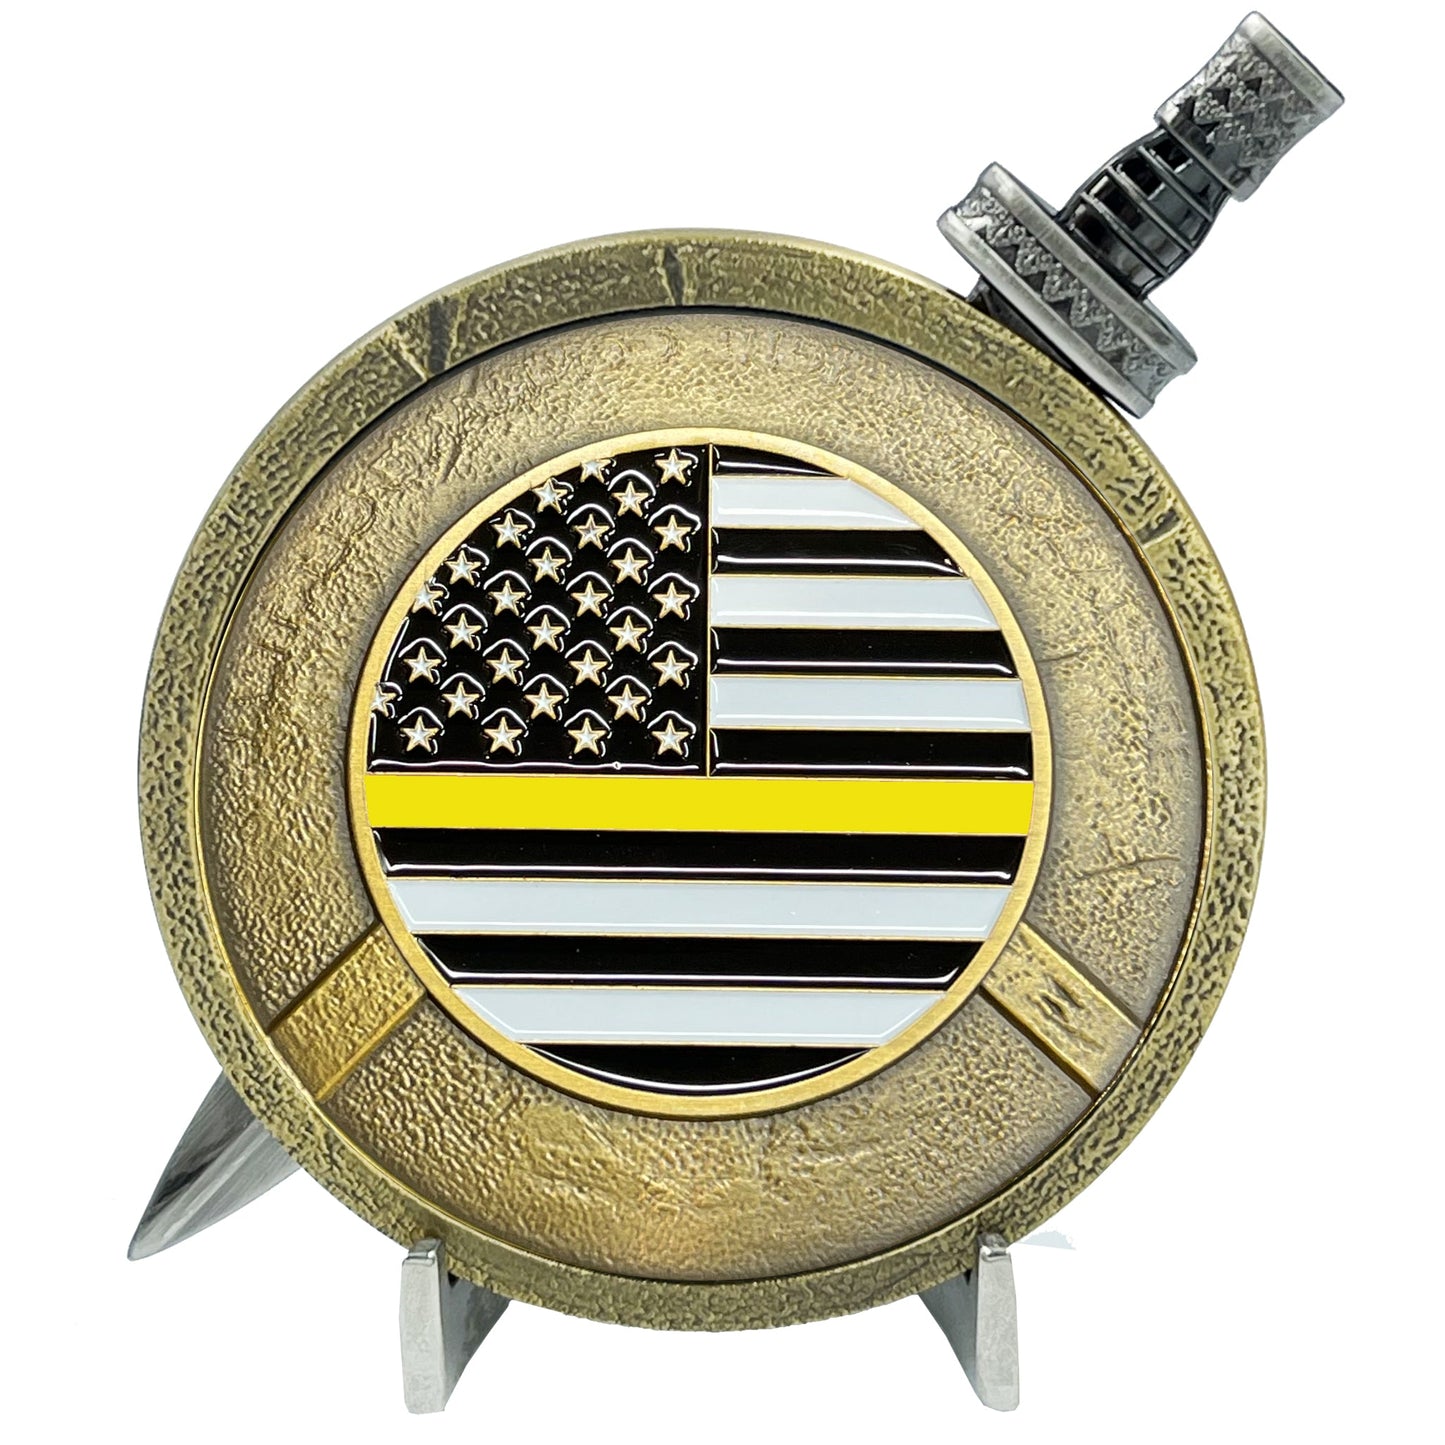 EL5-019 Thin Gold Line 911 Emergency Dispatcher Police Warrior Yellow Gladiator Shield with removable Sword Challenge Coin Set